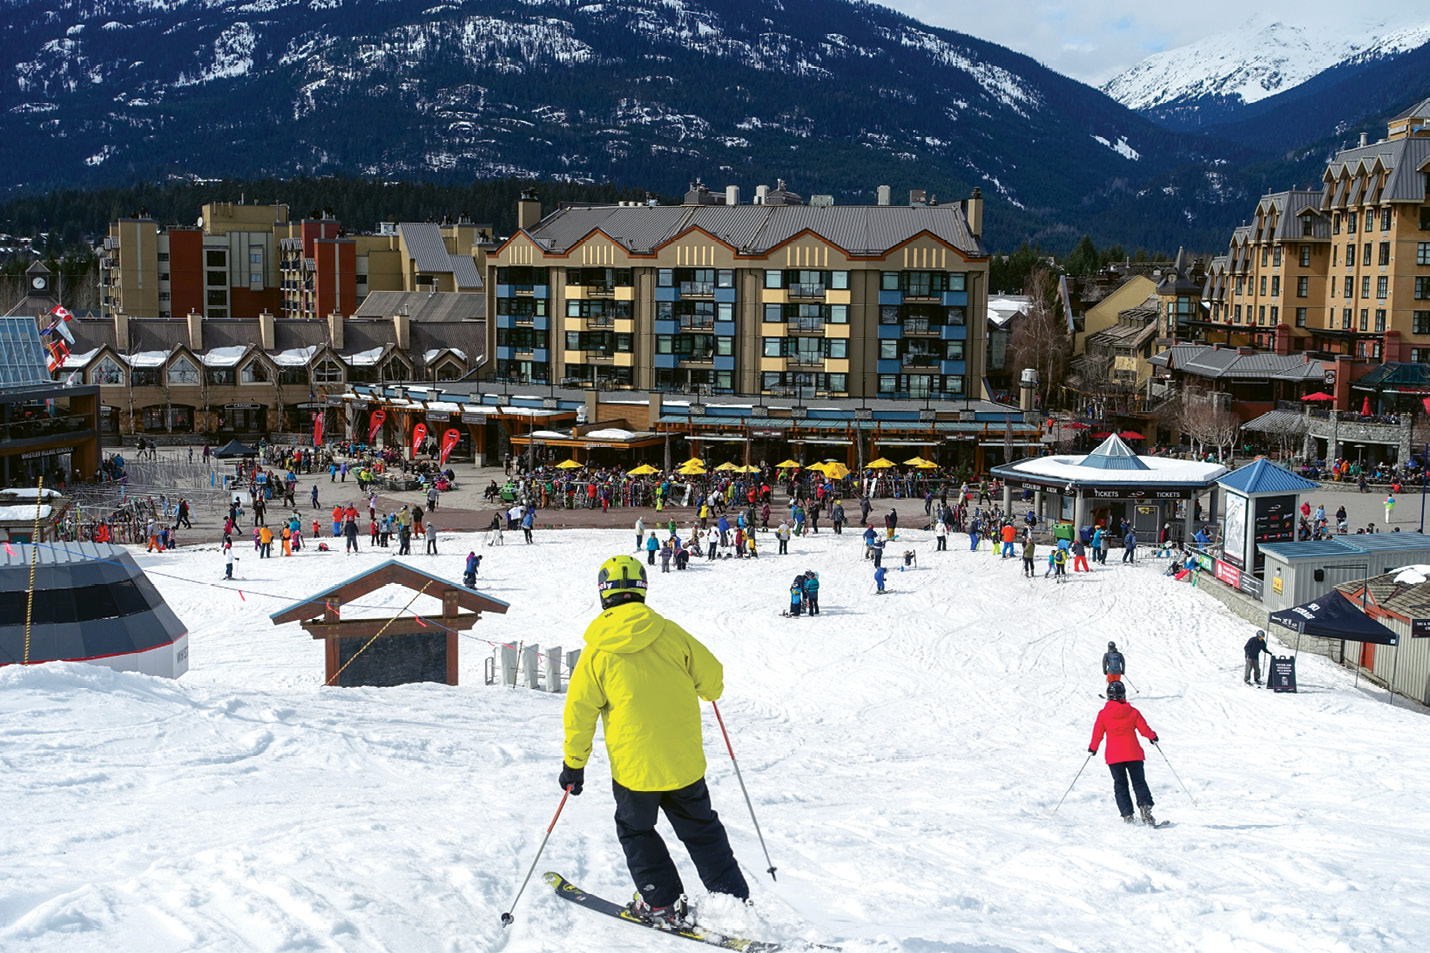 ...to the base village with its dozens of restaurants and après-ski bars in walking distance of the ski-in town center.